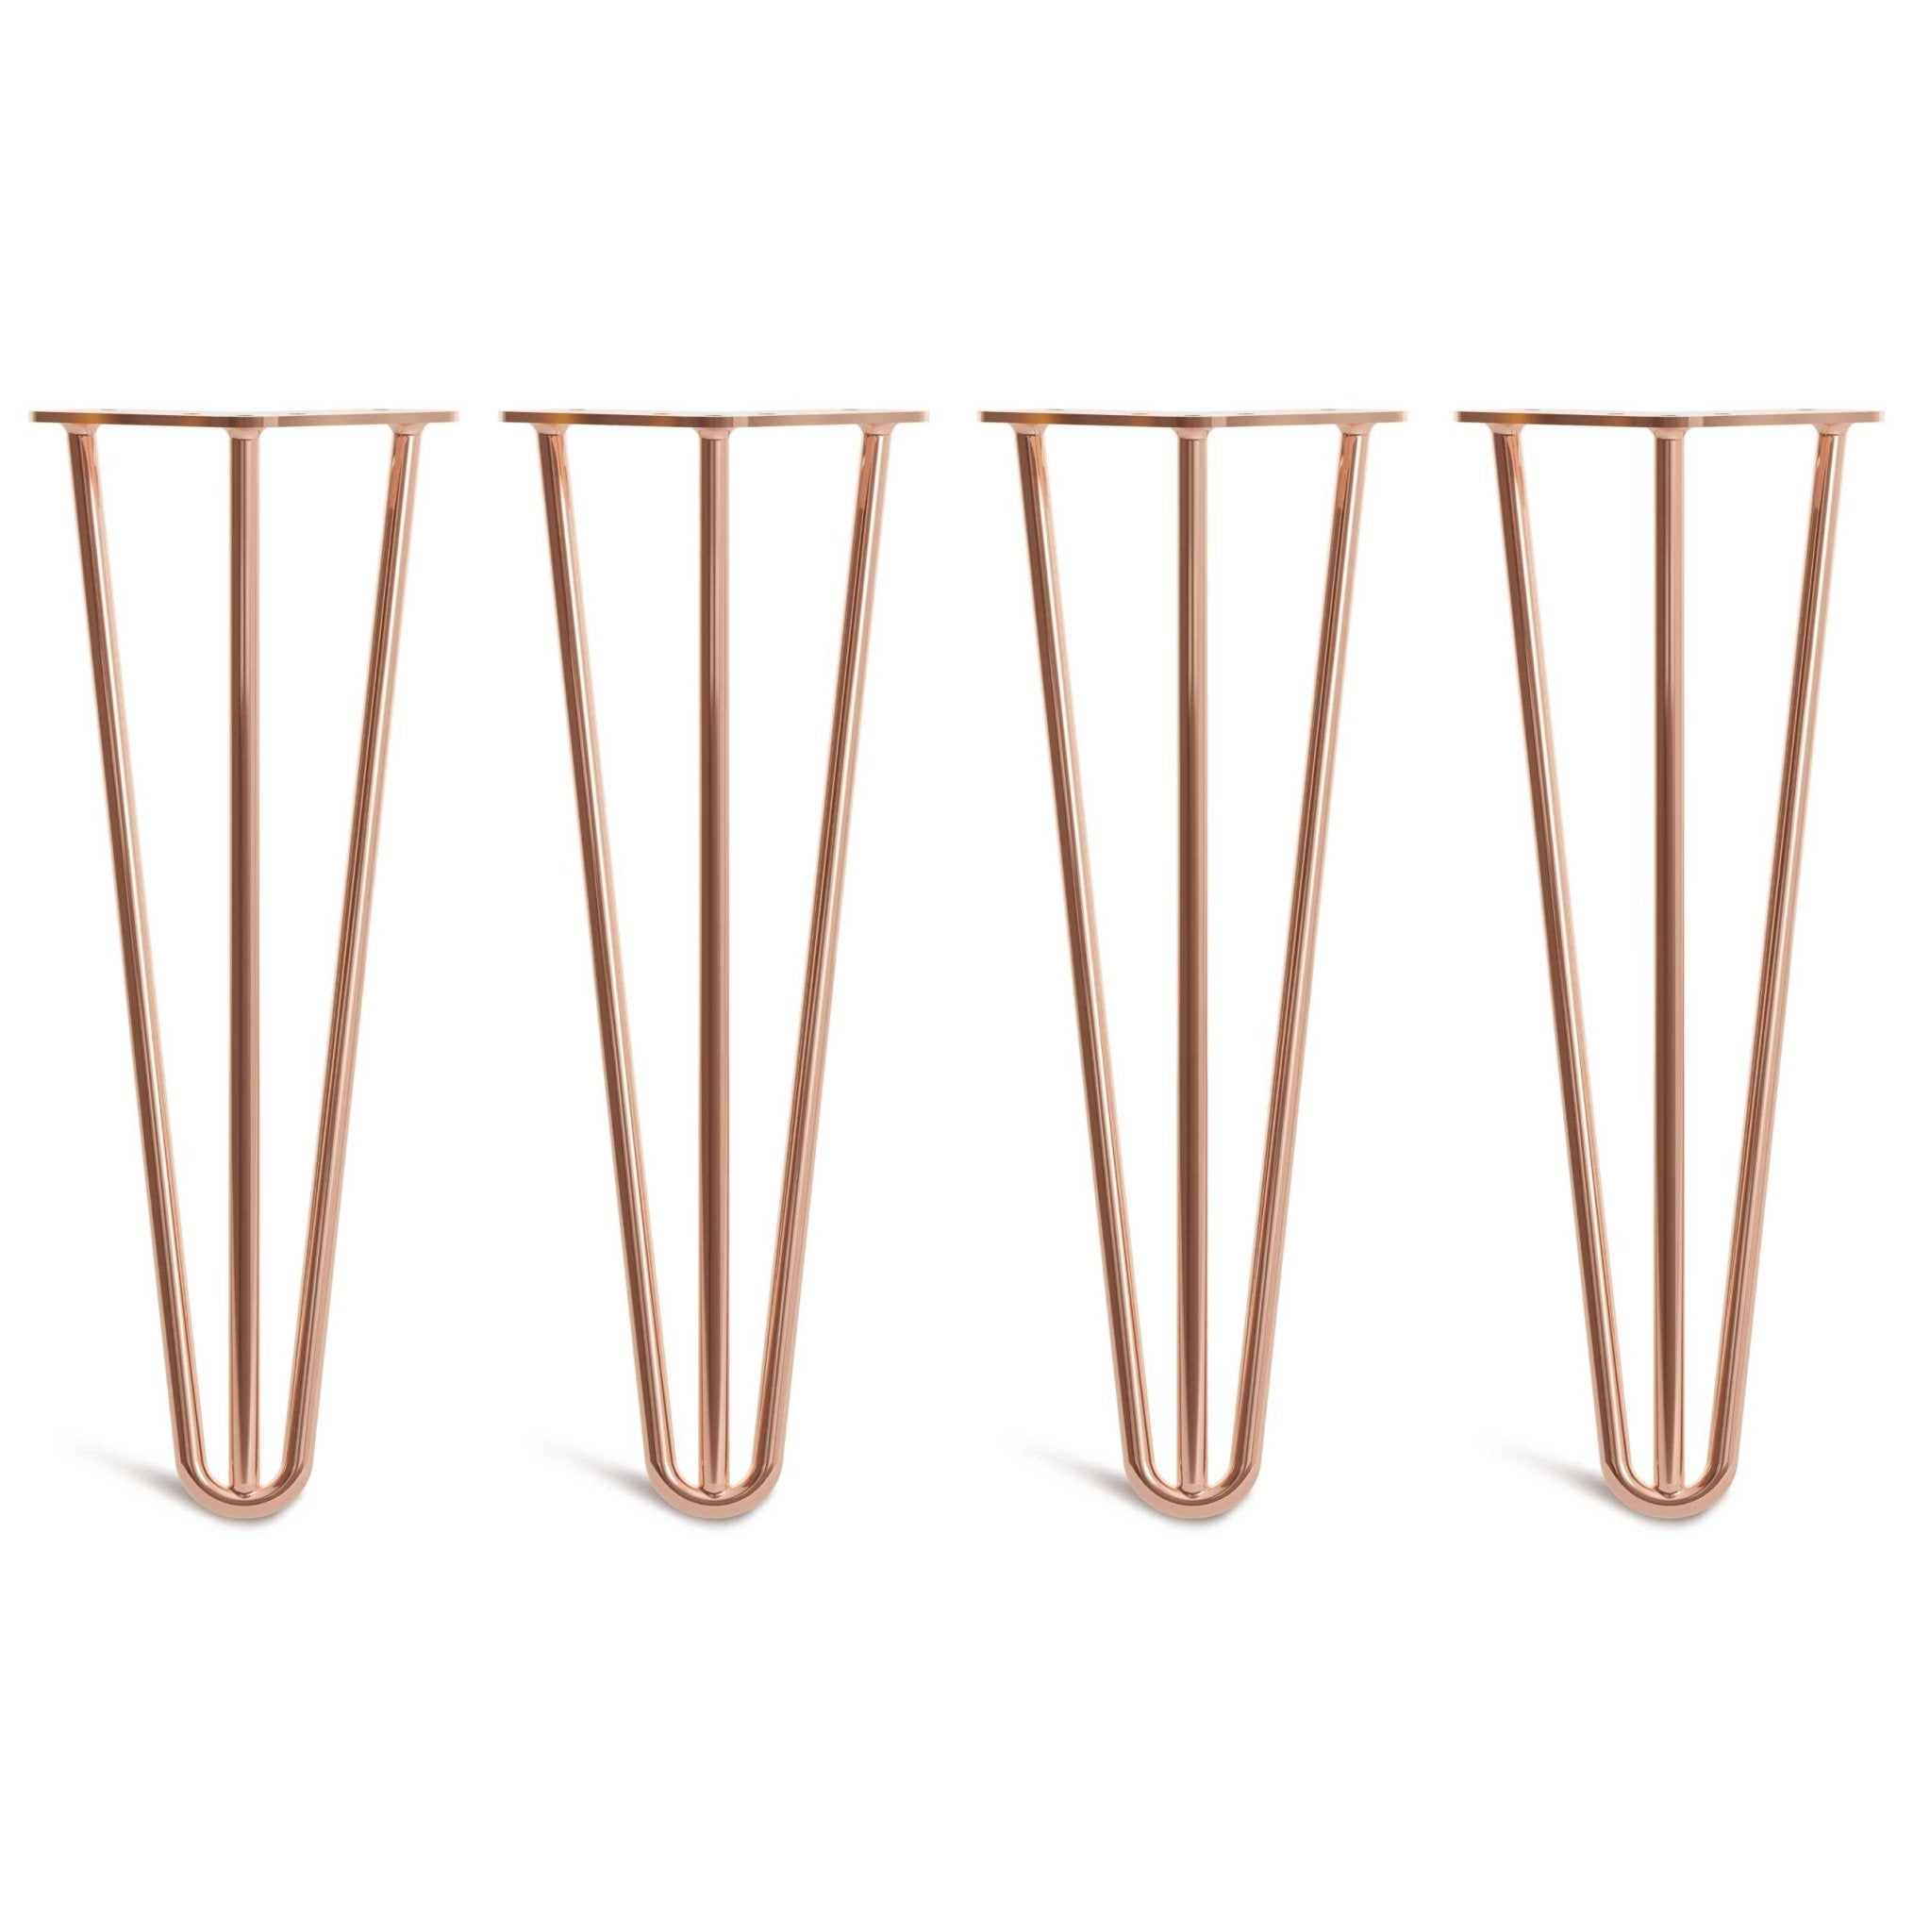 35cm Hairpin Legs - Coffee Table-3 Rod-Copper-The Hairpin Leg Co.